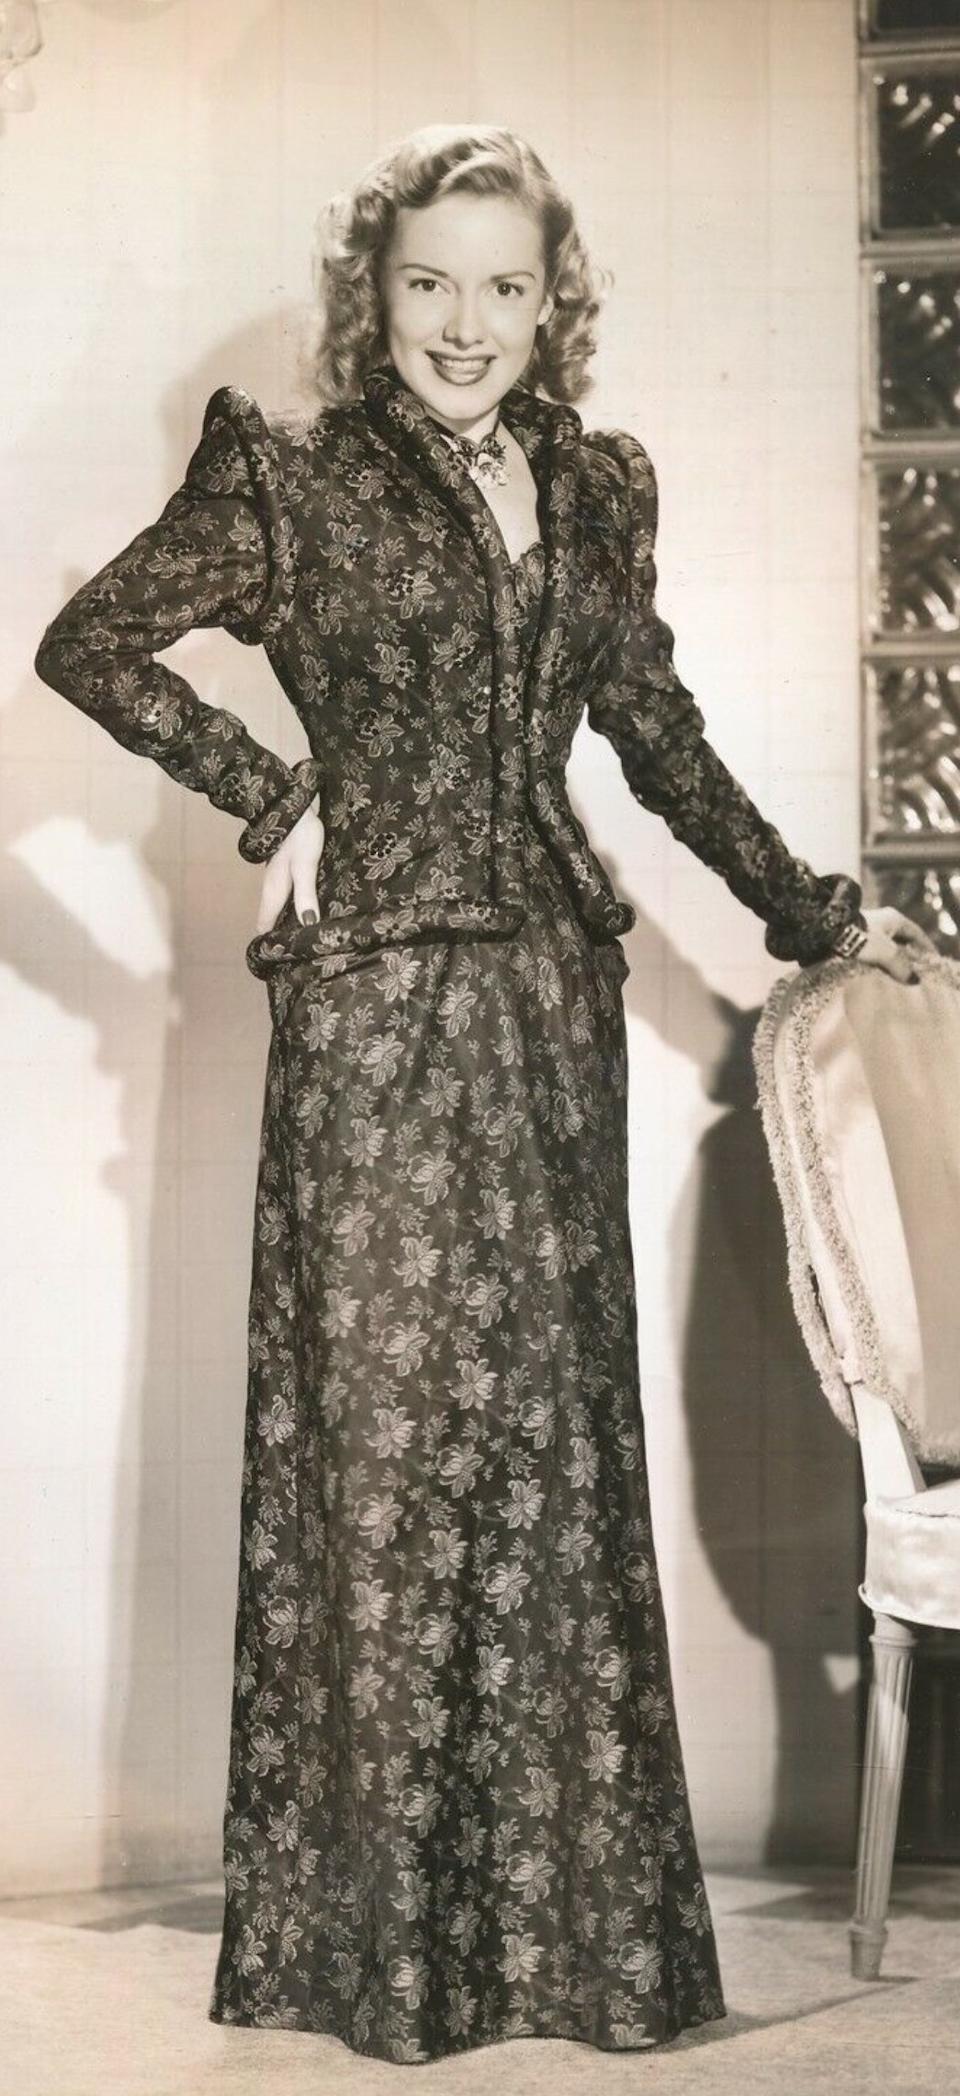 A Paramount Pictures gown worn by Veronica Lake, Gail Russell, and Virginia Welles